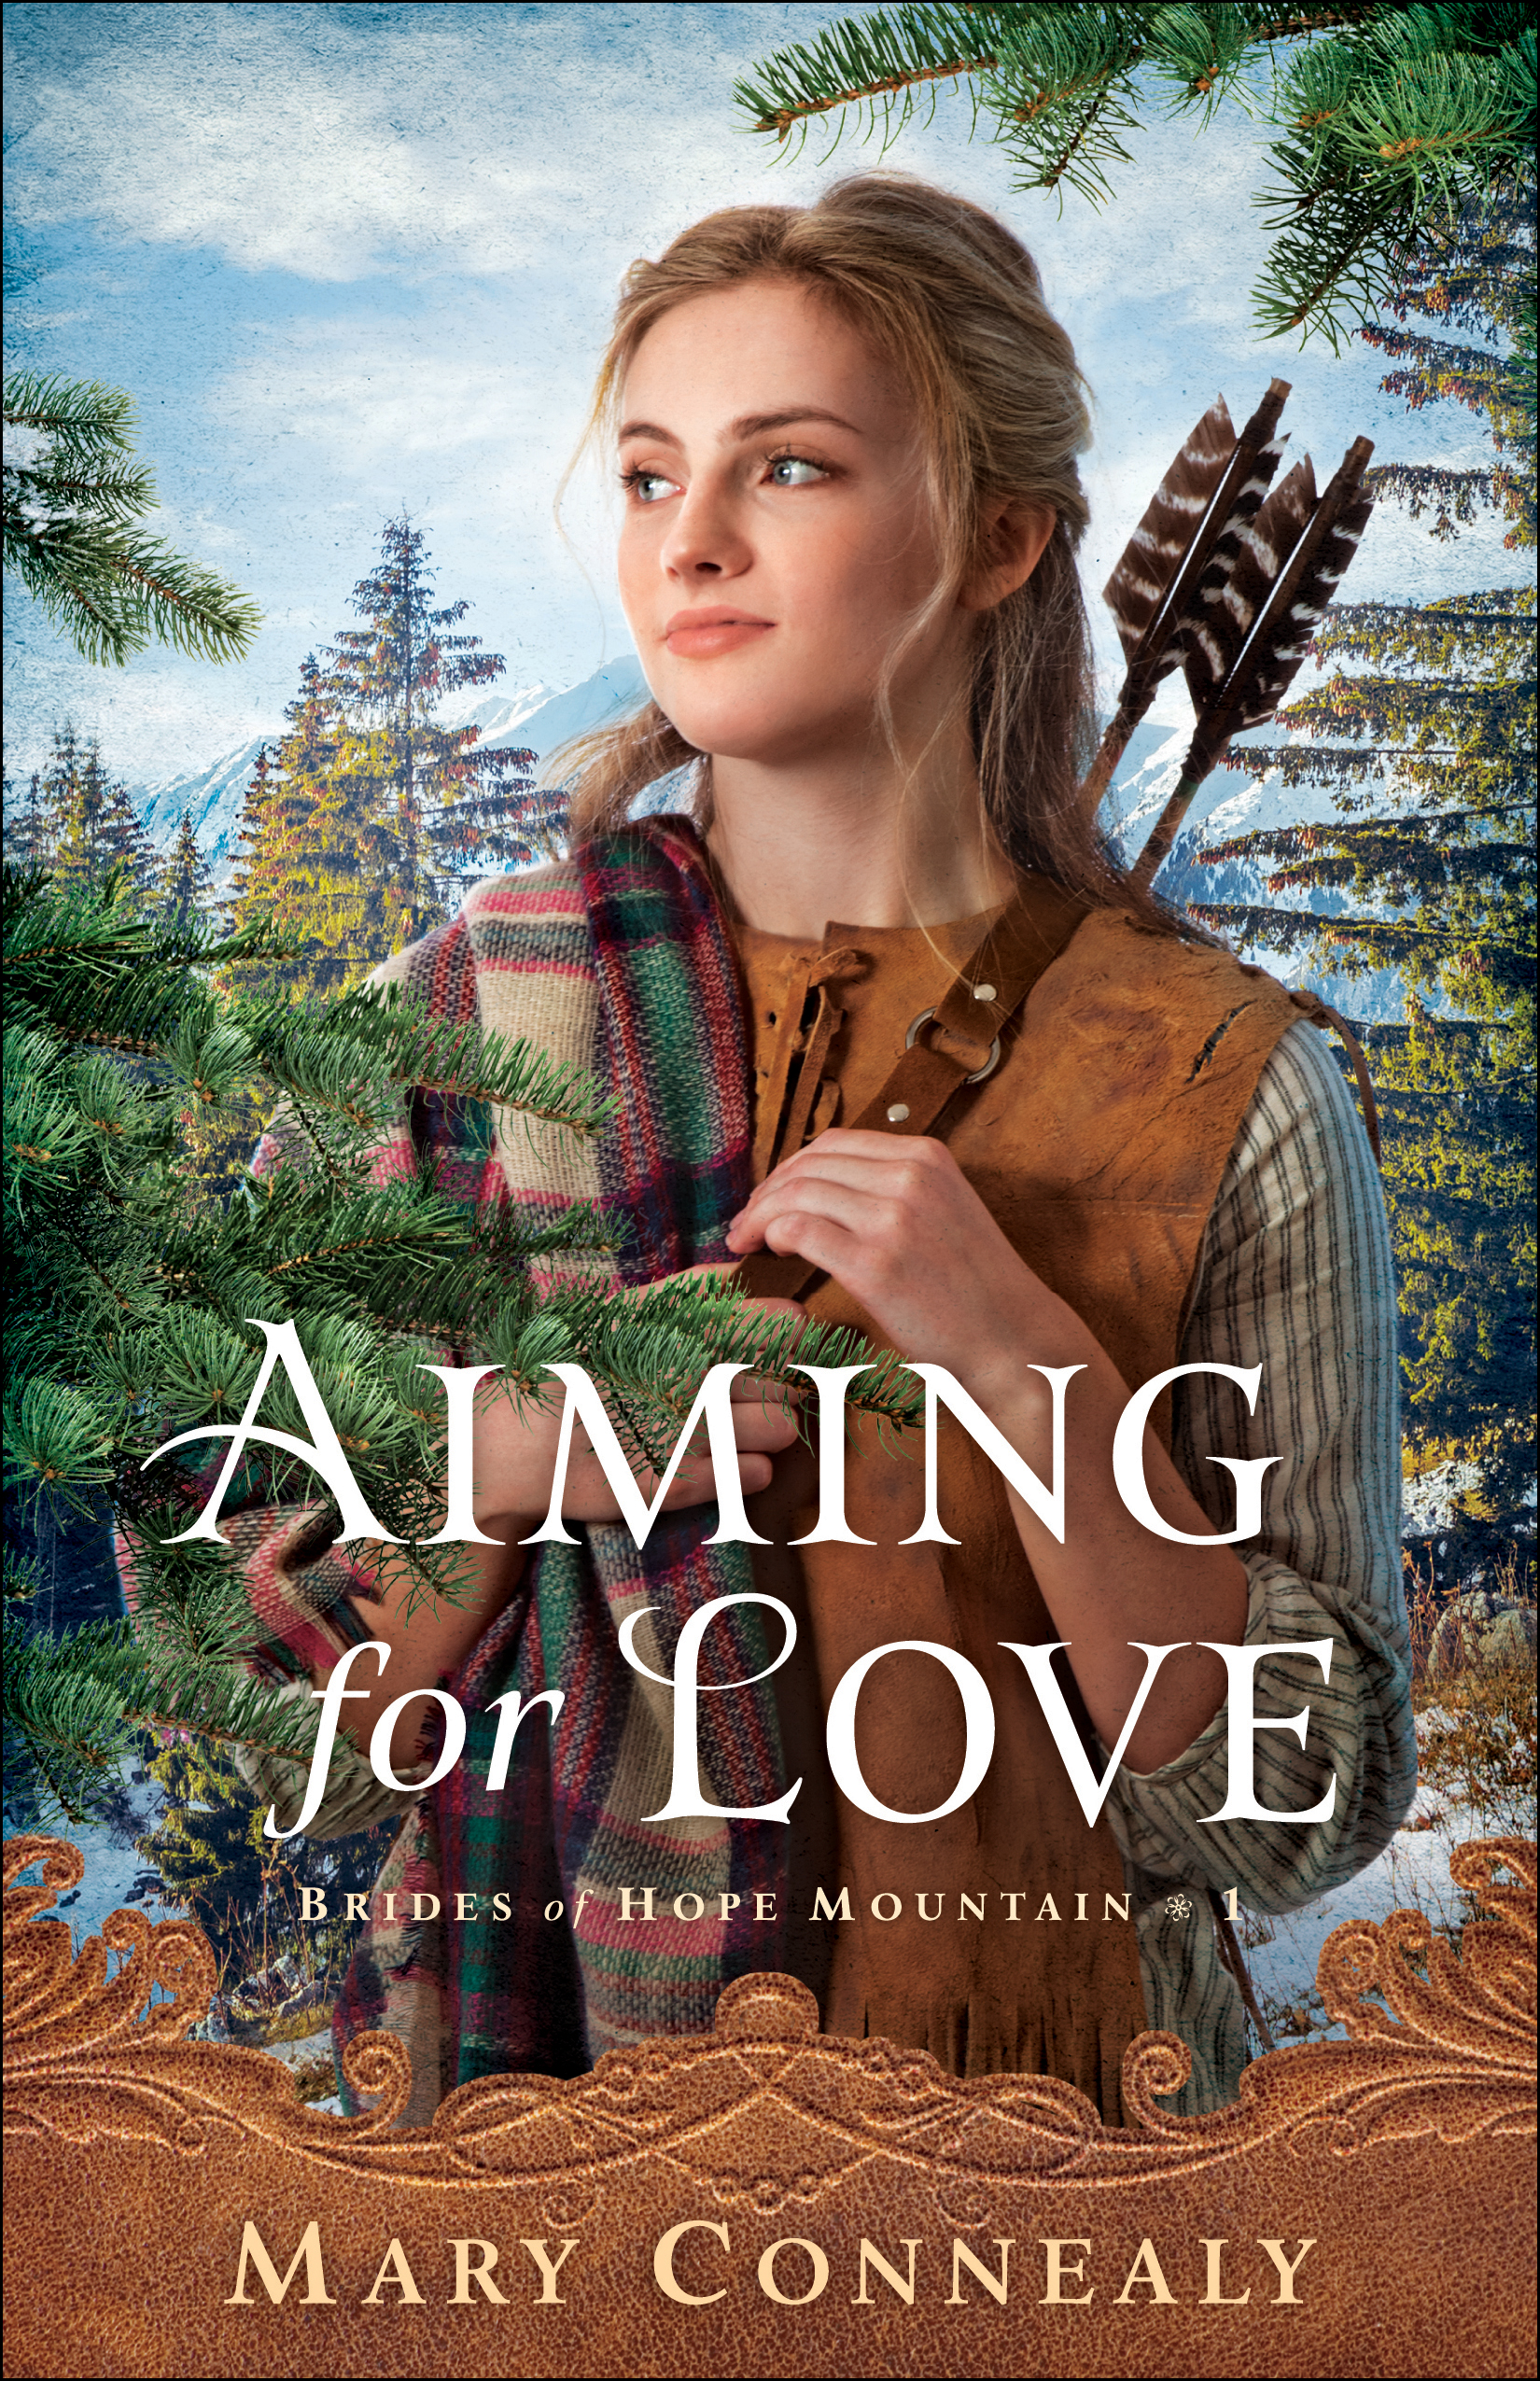 Aiming for Love by Mary Connealy